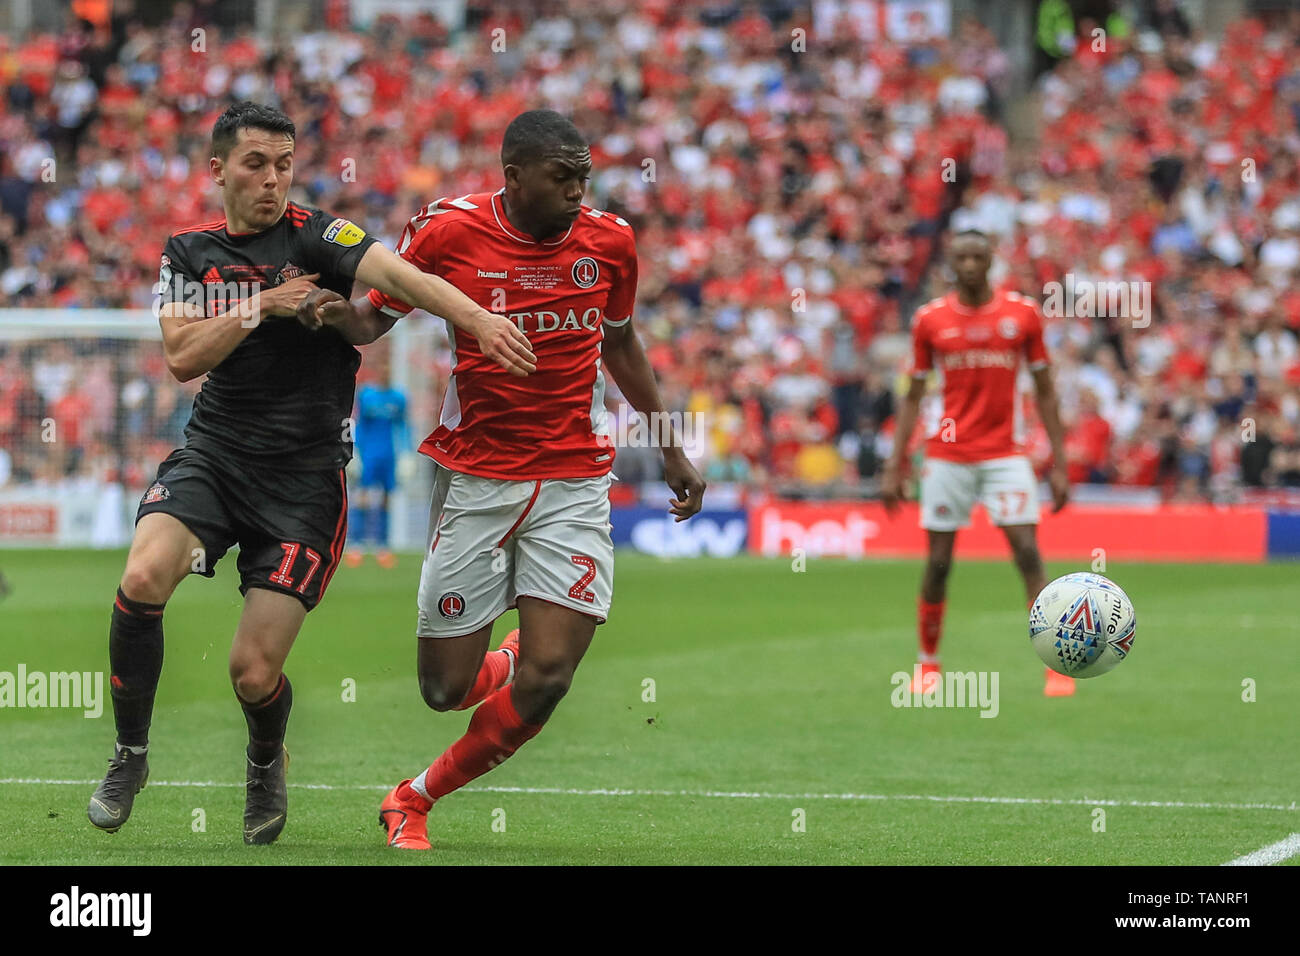 26th May 2019 , Wembley Stadium, London, England ; Sky Bet League 1 Playoff Final , Charlton Athletic vs Sunderland ; Anfernee Dijksteel (02) of Charlton holds off Lewis Morgan (17) of Sunderland    Credit: Mark Cosgrove/News Images    English Football League images are subject to DataCo Licence Stock Photo